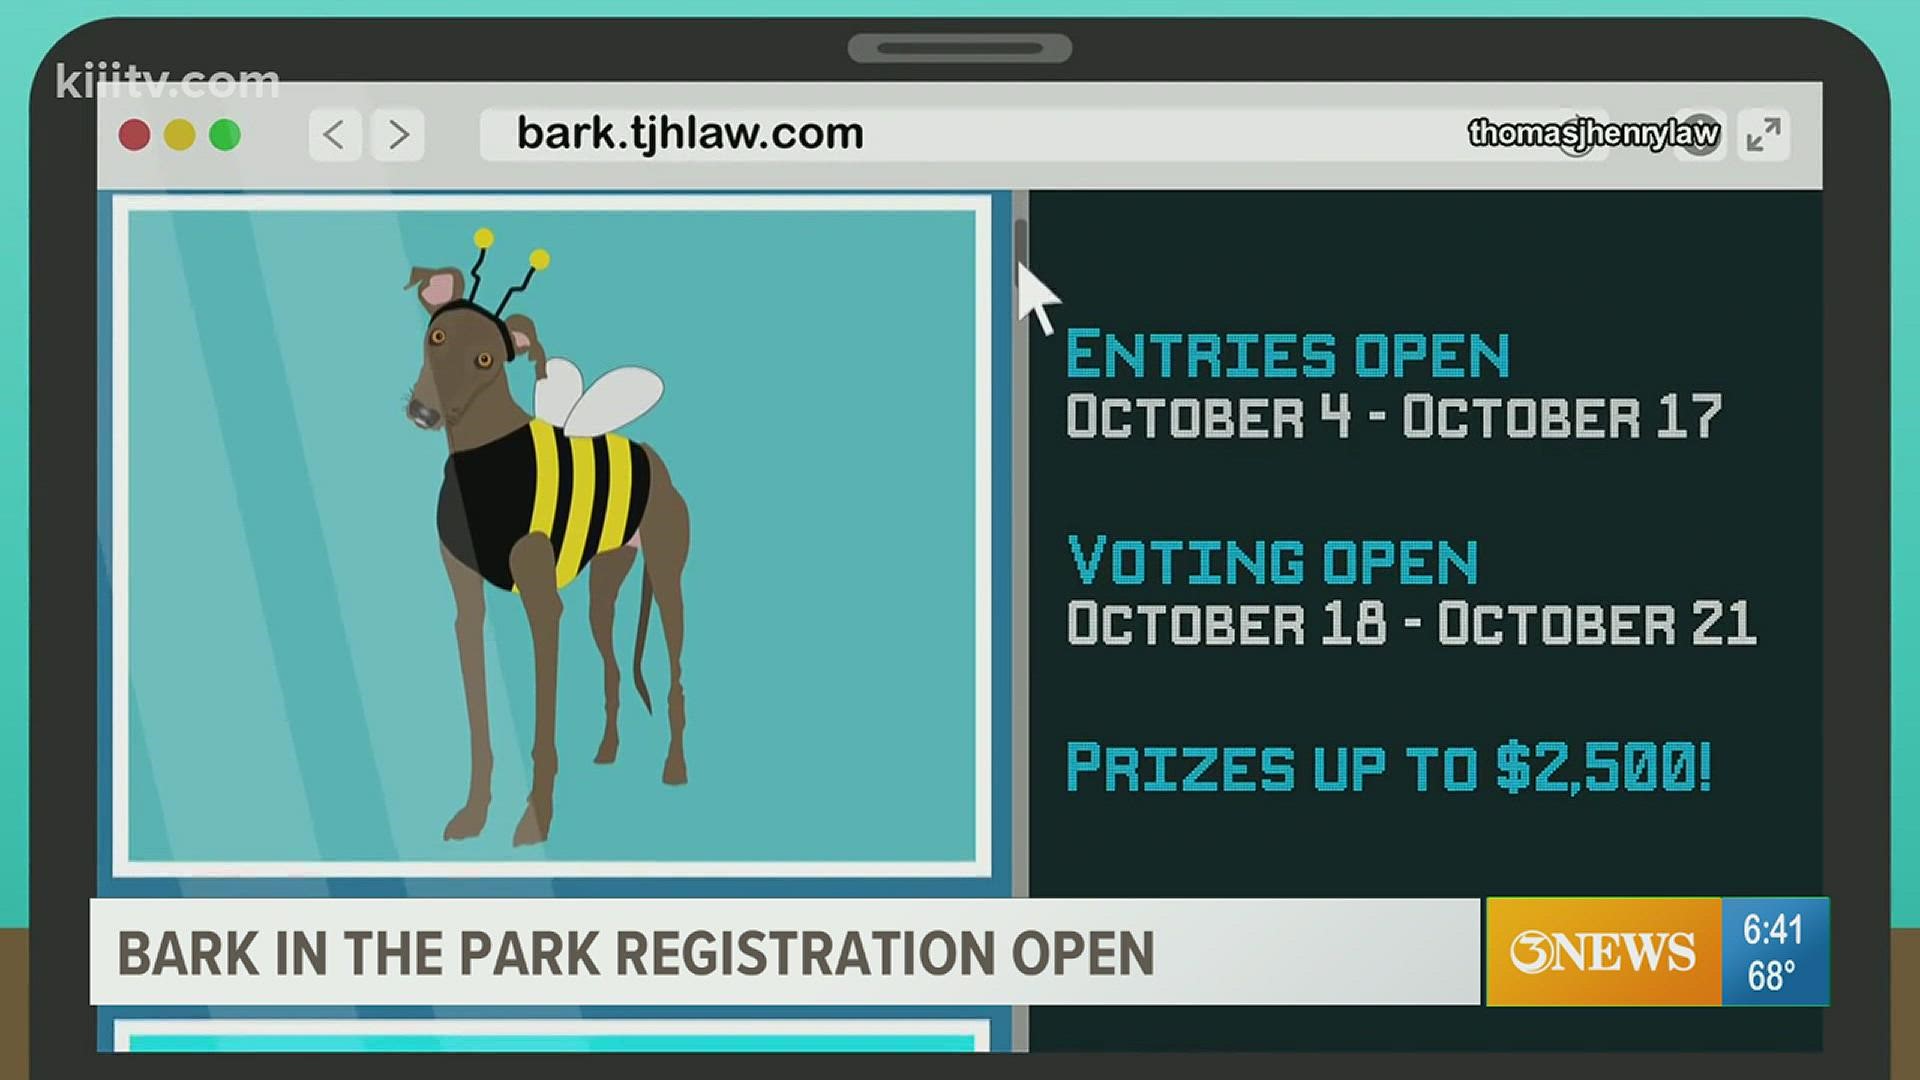 The 10th Annual Thomas J. Henry Bark in the Park will happen as an entirely online event! This year’s online pet costume contest will be open to all U.S. residents.